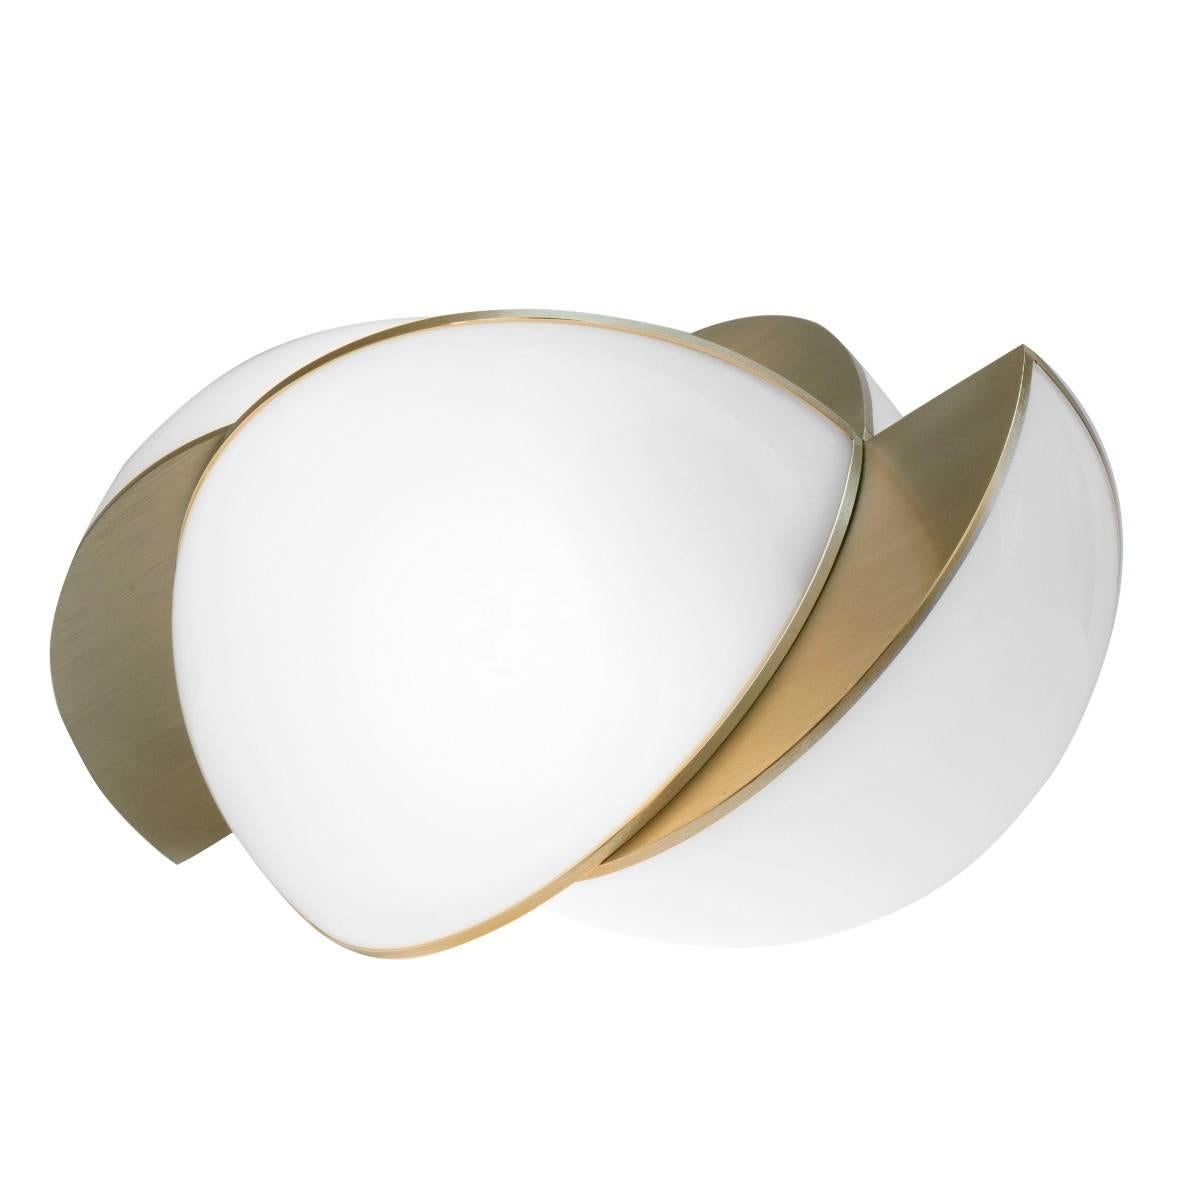 Collision Large Table Light, Gold Galvanic with White Acrylic by Lara Bohinc